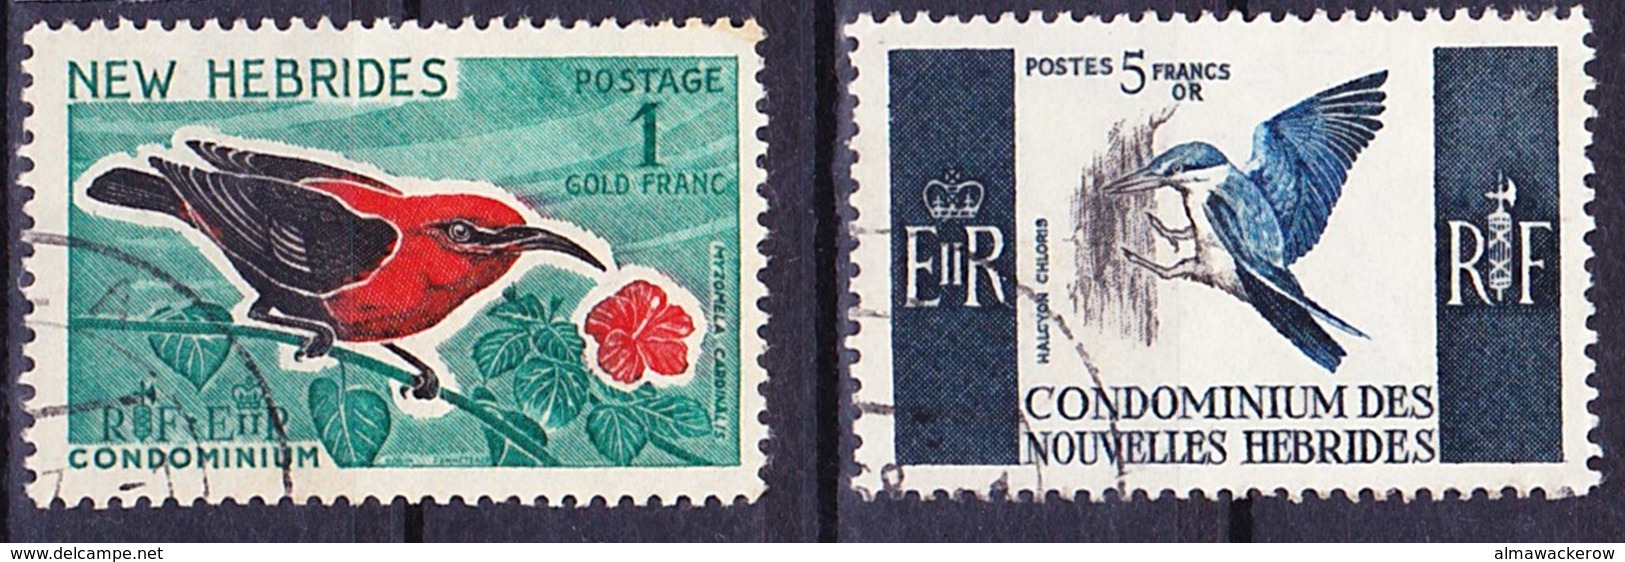 New Hebrides 1966 Bird Definitives Mi 238, 243; Yv 244, 255 Used O, I Sell My Collection! - Gebraucht